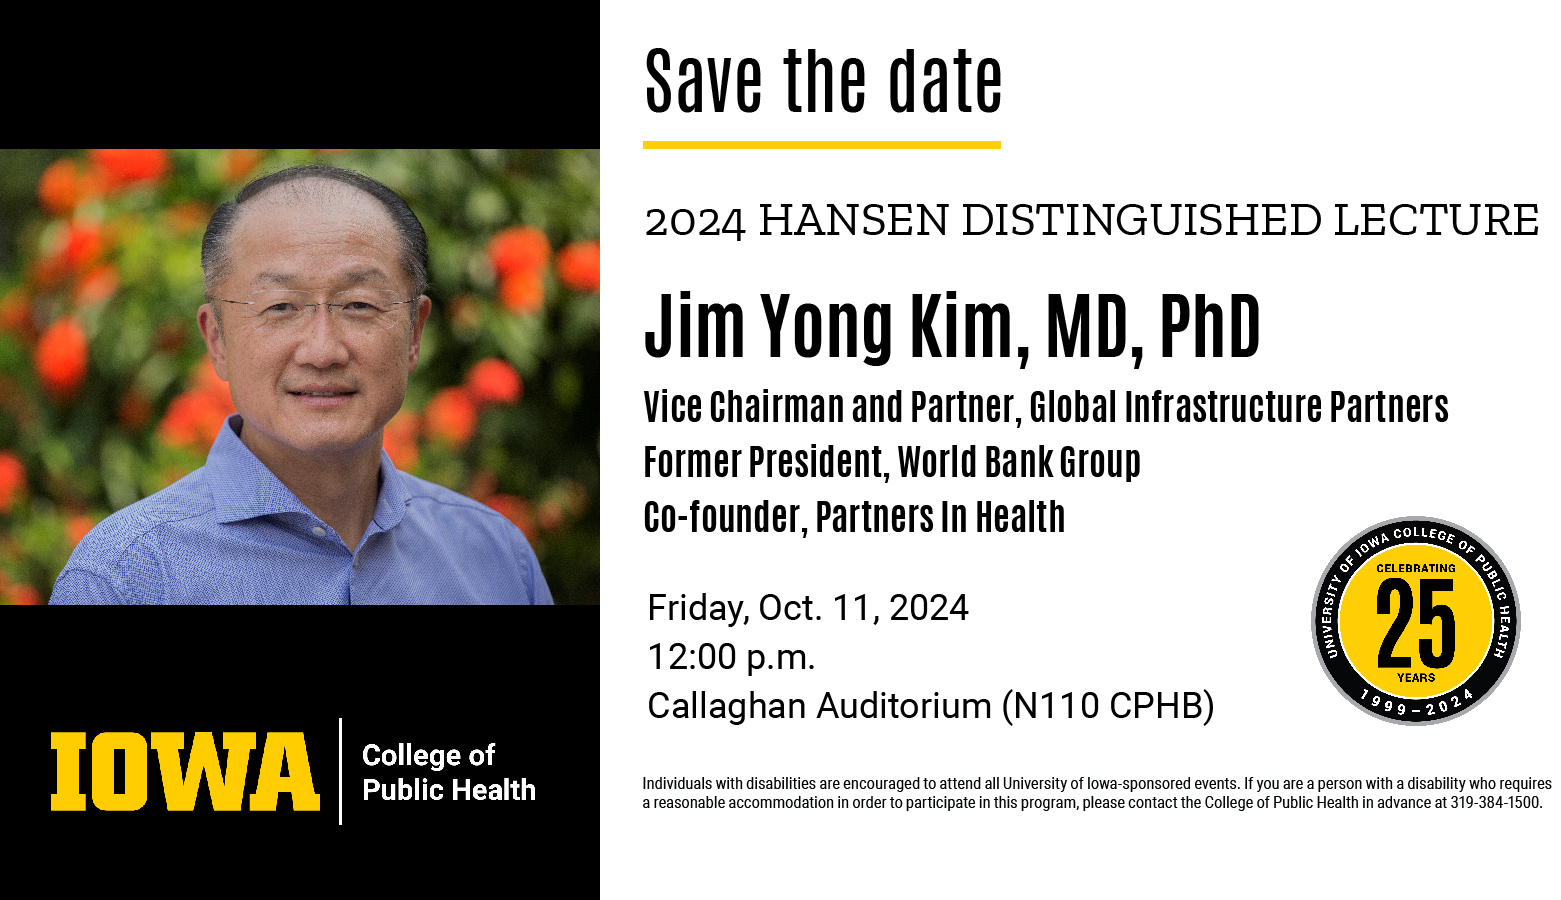 Save the Date: Jim Yong Kim, MD, PhD, will present the Hansen Distinguished Lecture on October 11, 2024, at the UI College of Public Health